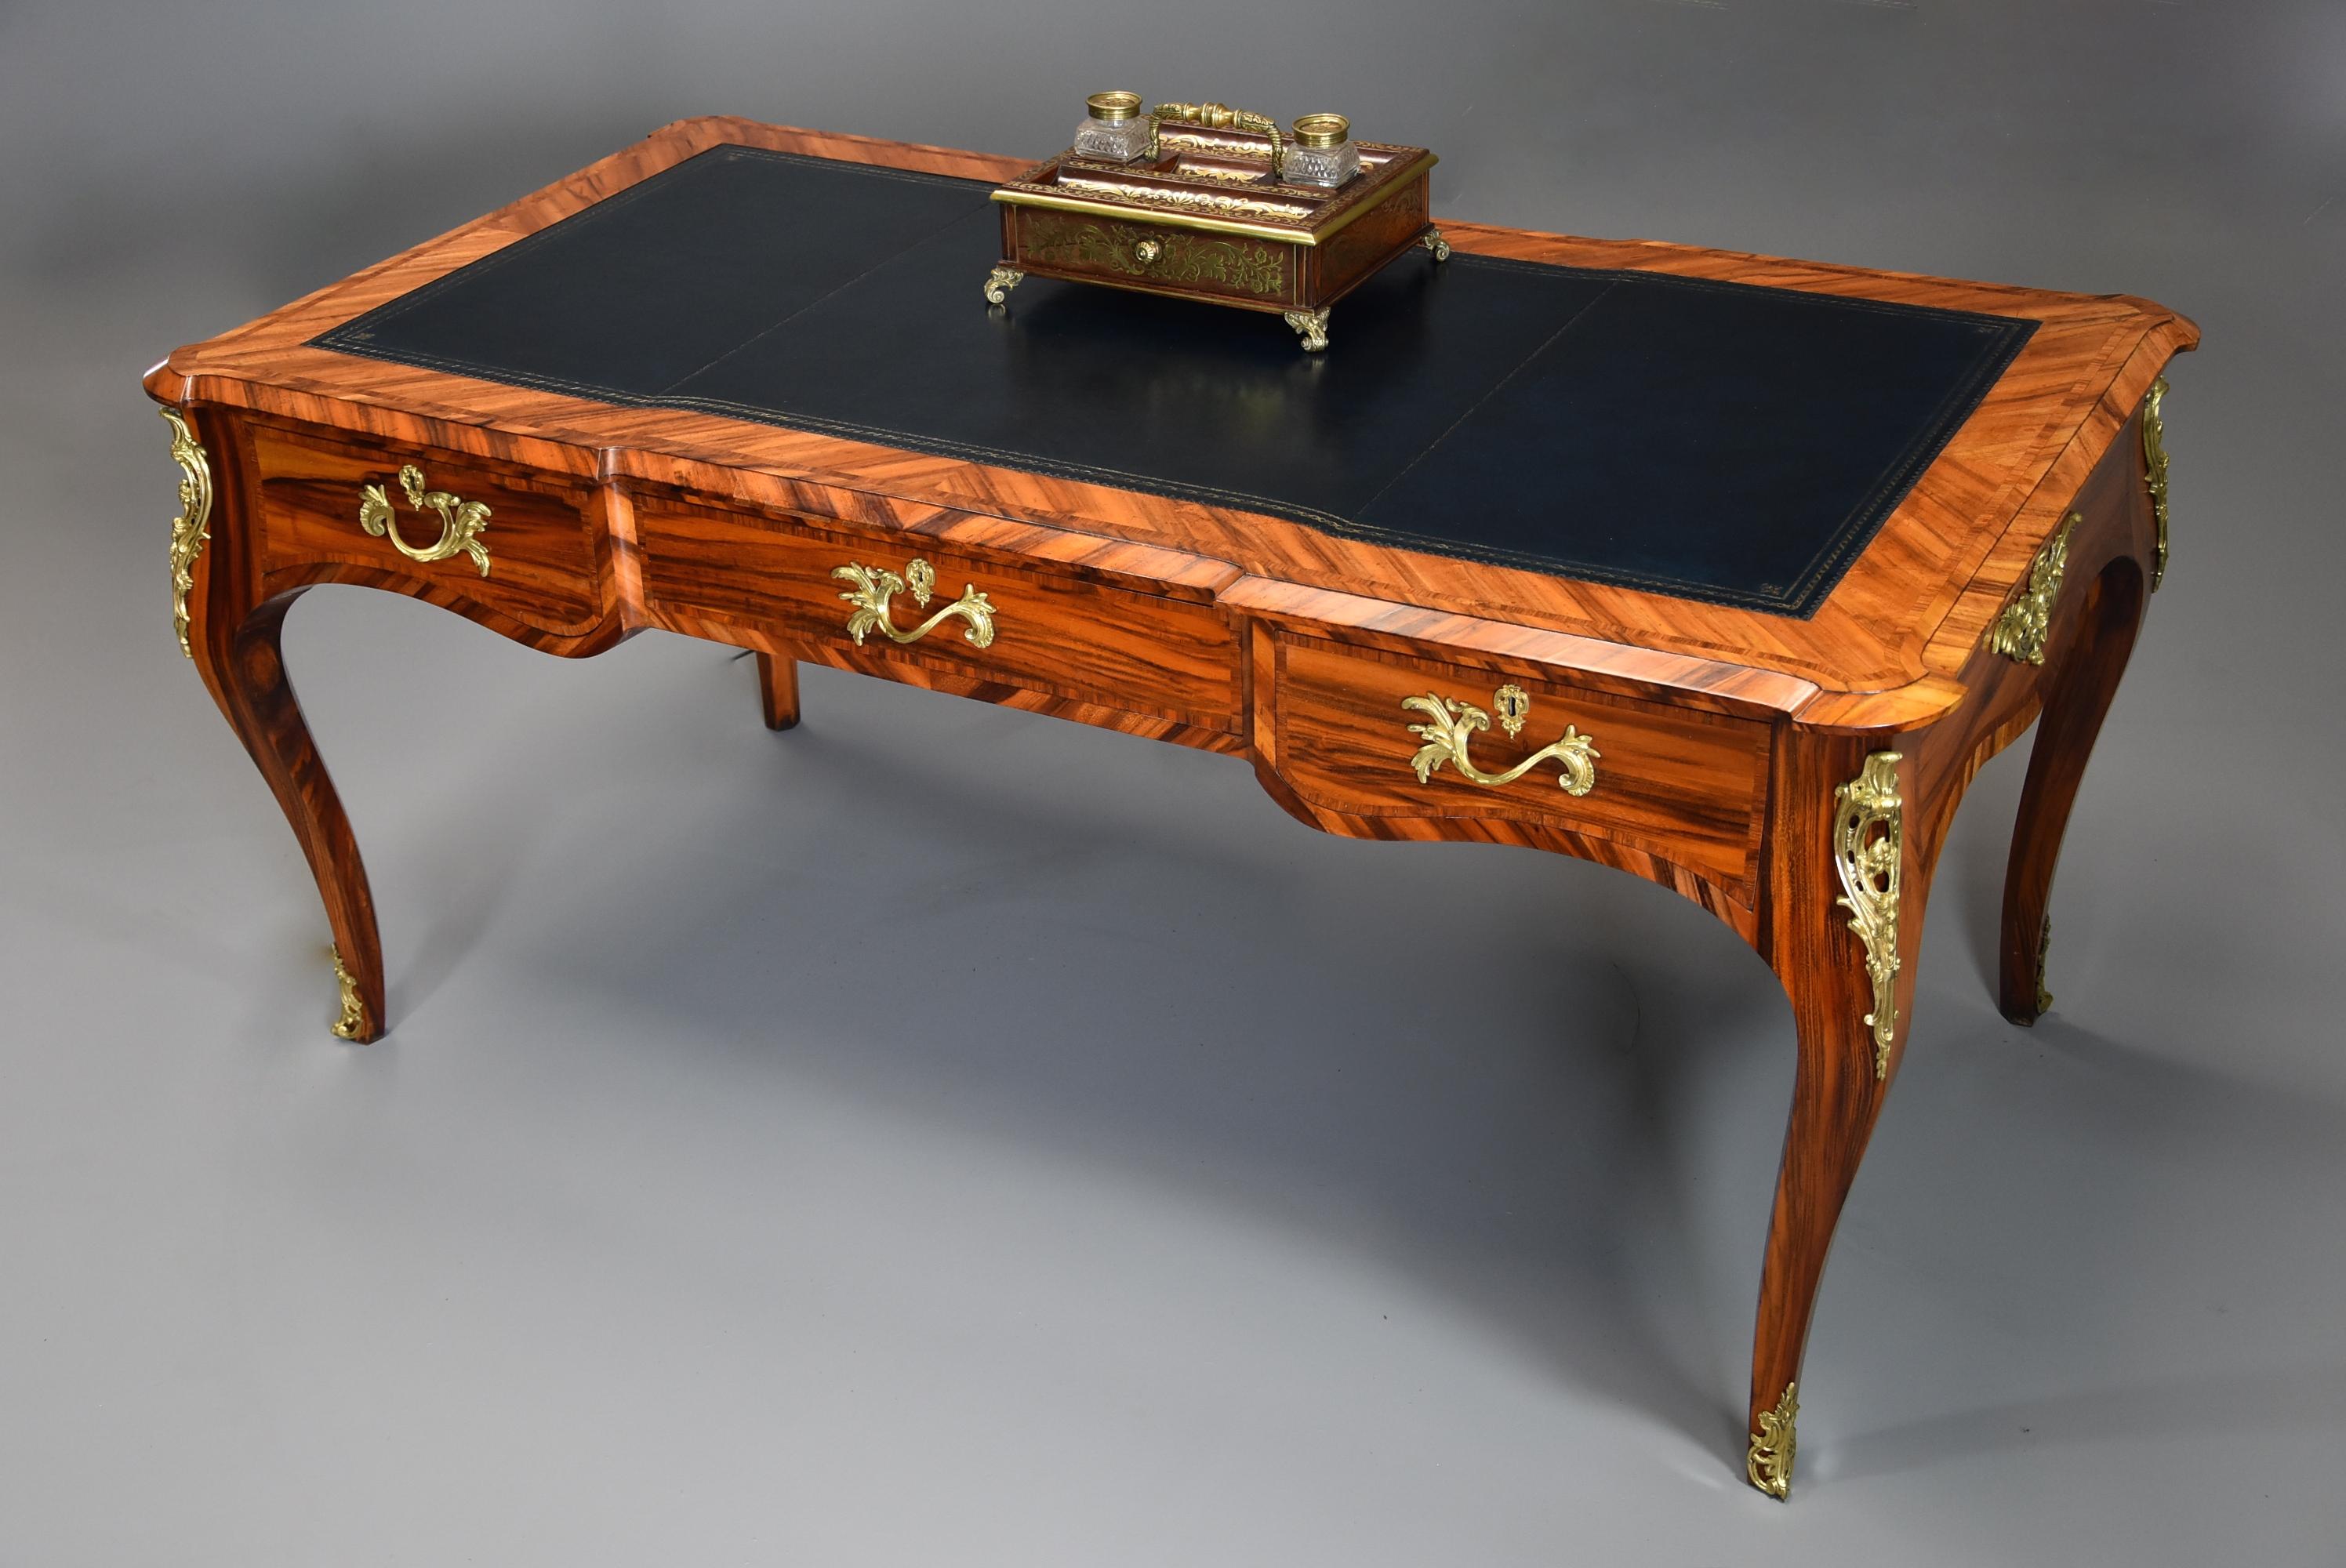 A fine quality mid-19th century (1840) Goncalo alves freestanding bureau plat in the French style of good proportions, attributed to Gillows of Lancaster.

This bureau plat consists of a dark blue tooled leather top with goncalo alves banding with a